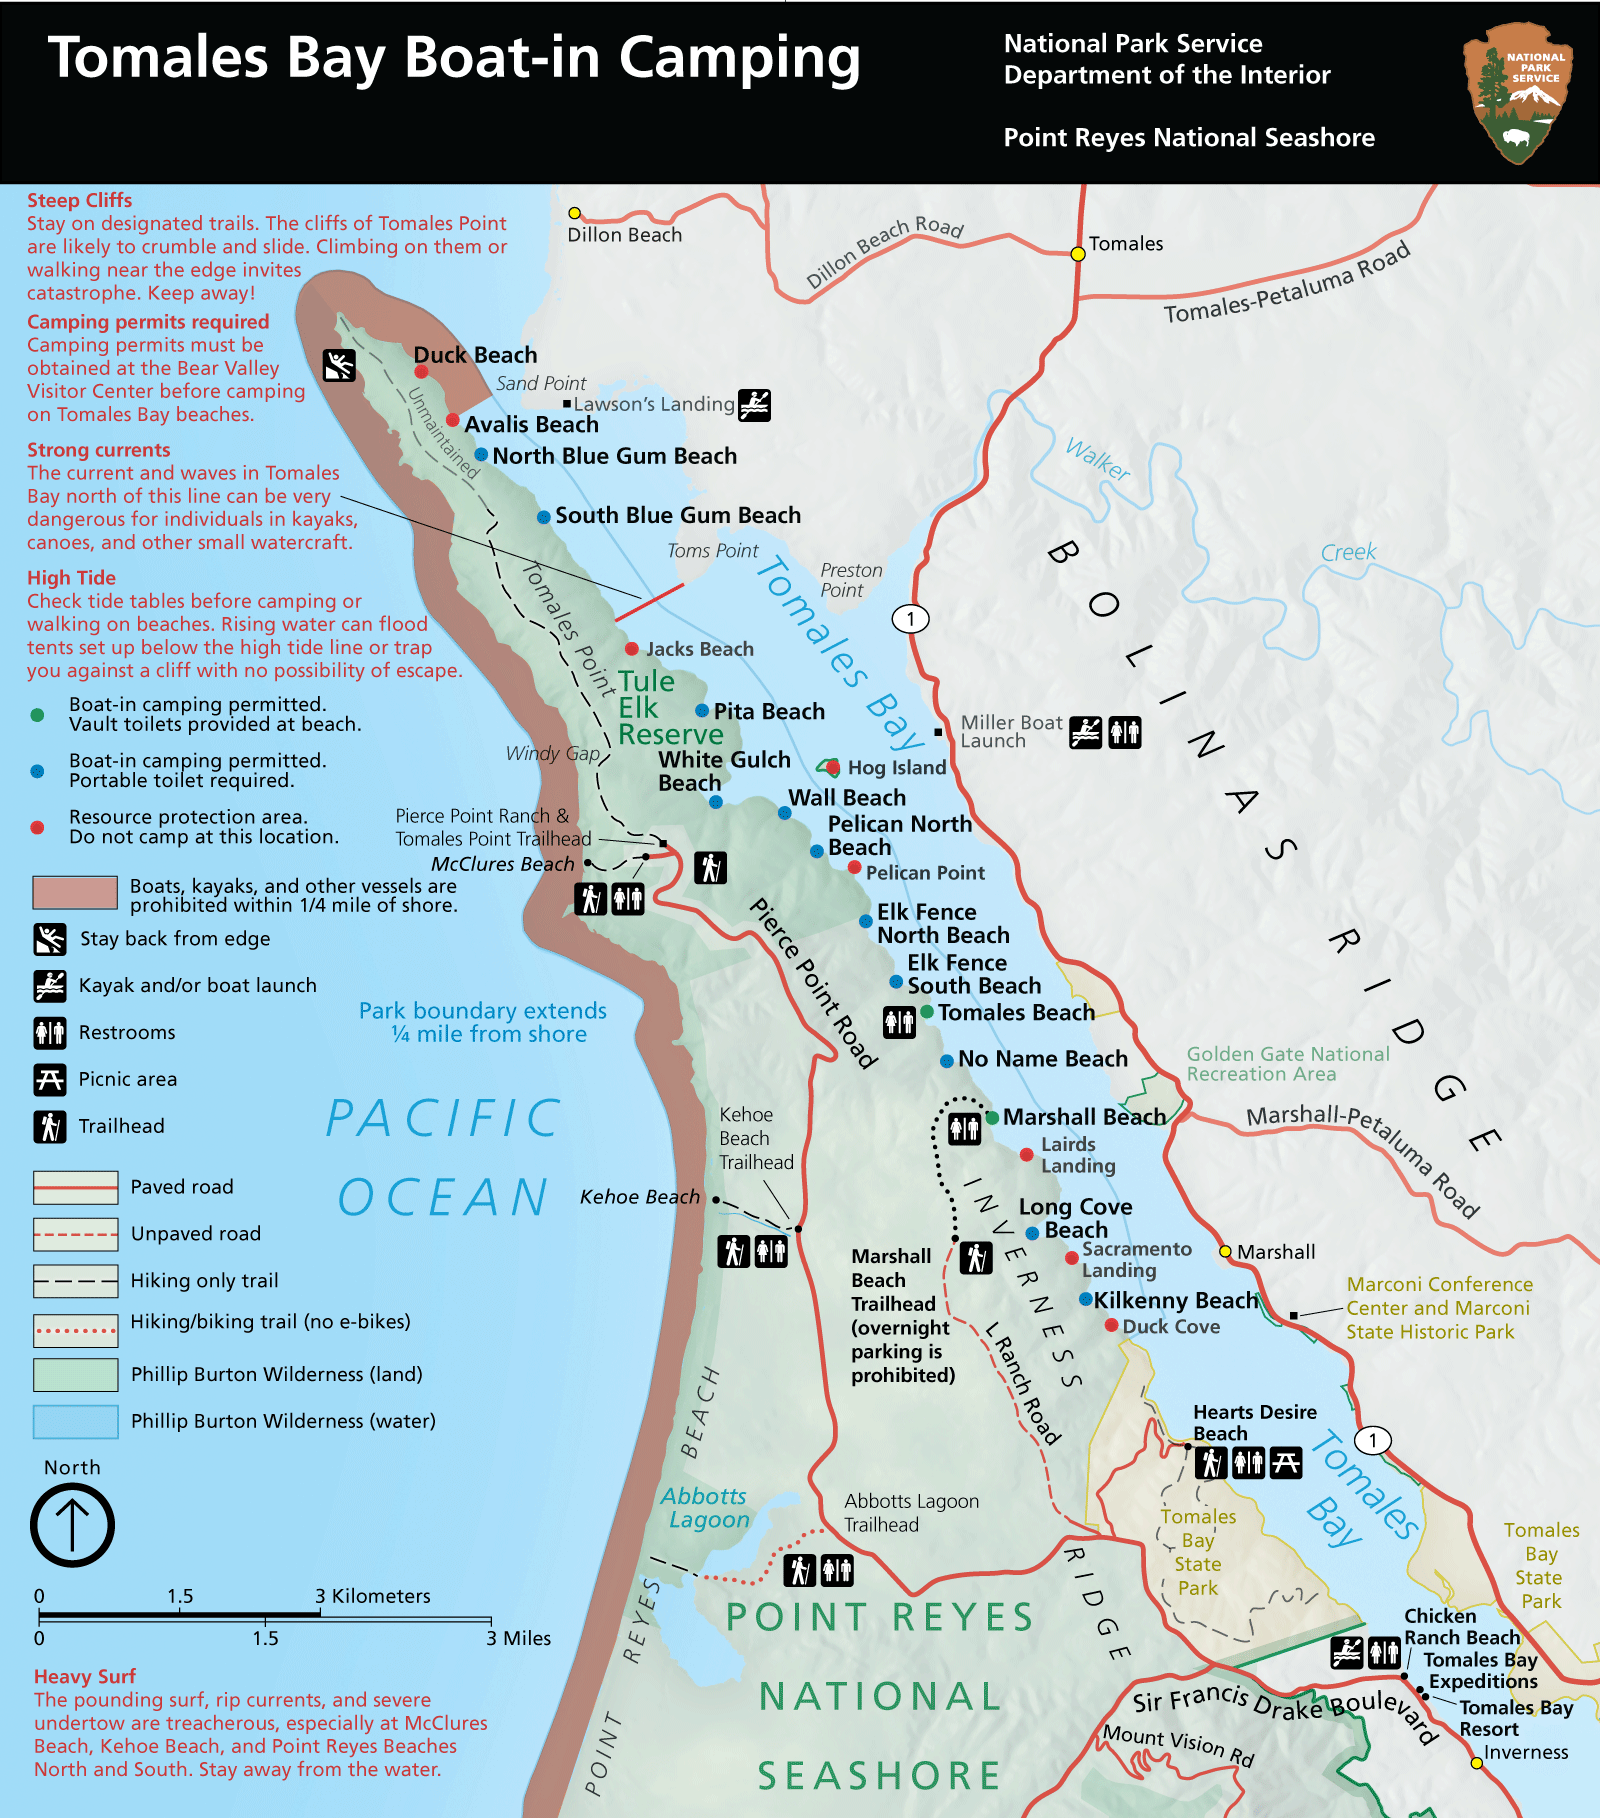 A map for locating beaches along Tomales Bay upon which camping is permitted. Click on this image to download a higher resolution PDF version of the map that also contains more detailed alt text.